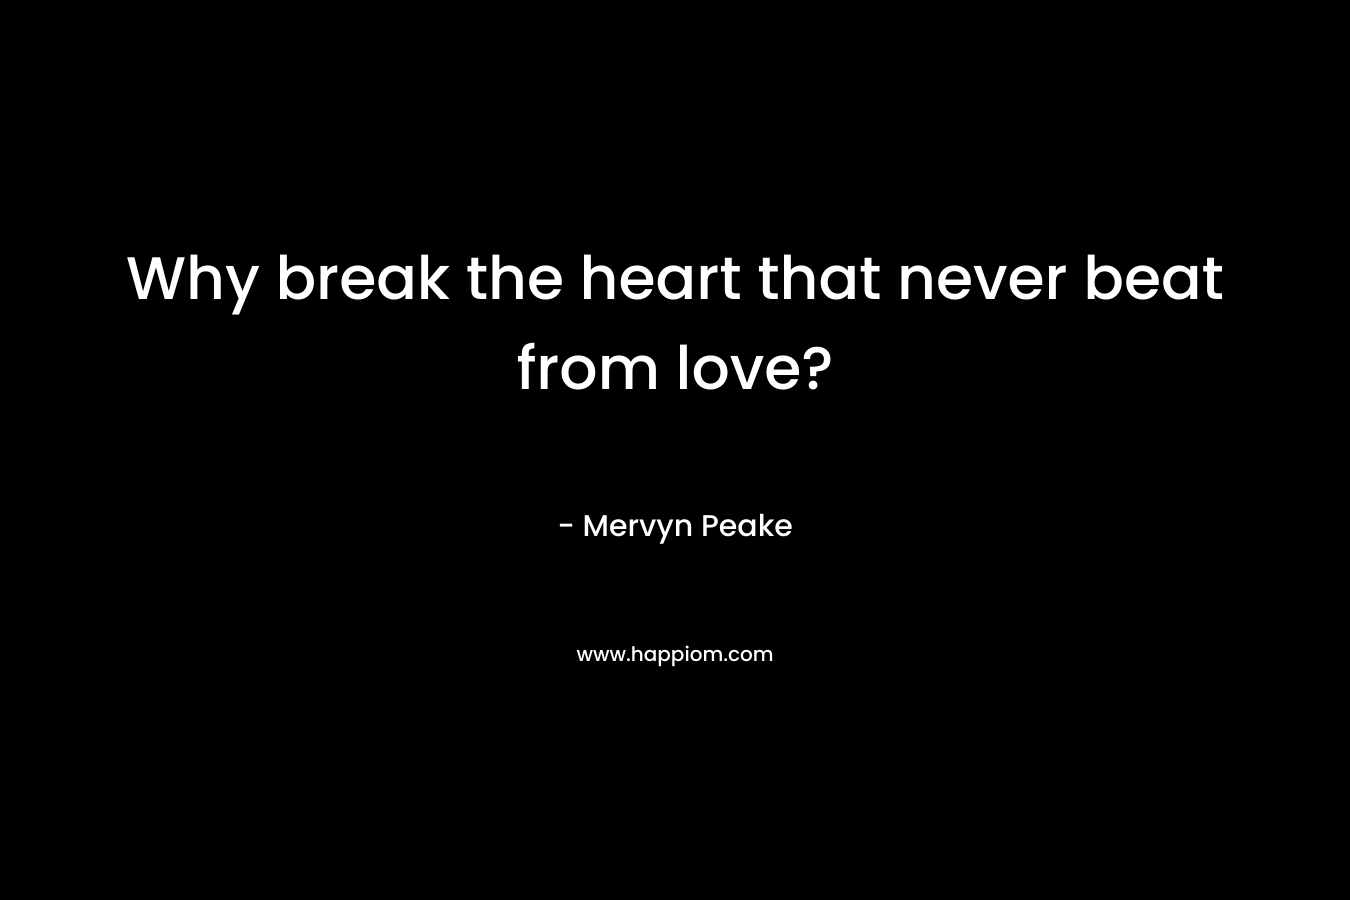 Why break the heart that never beat from love?